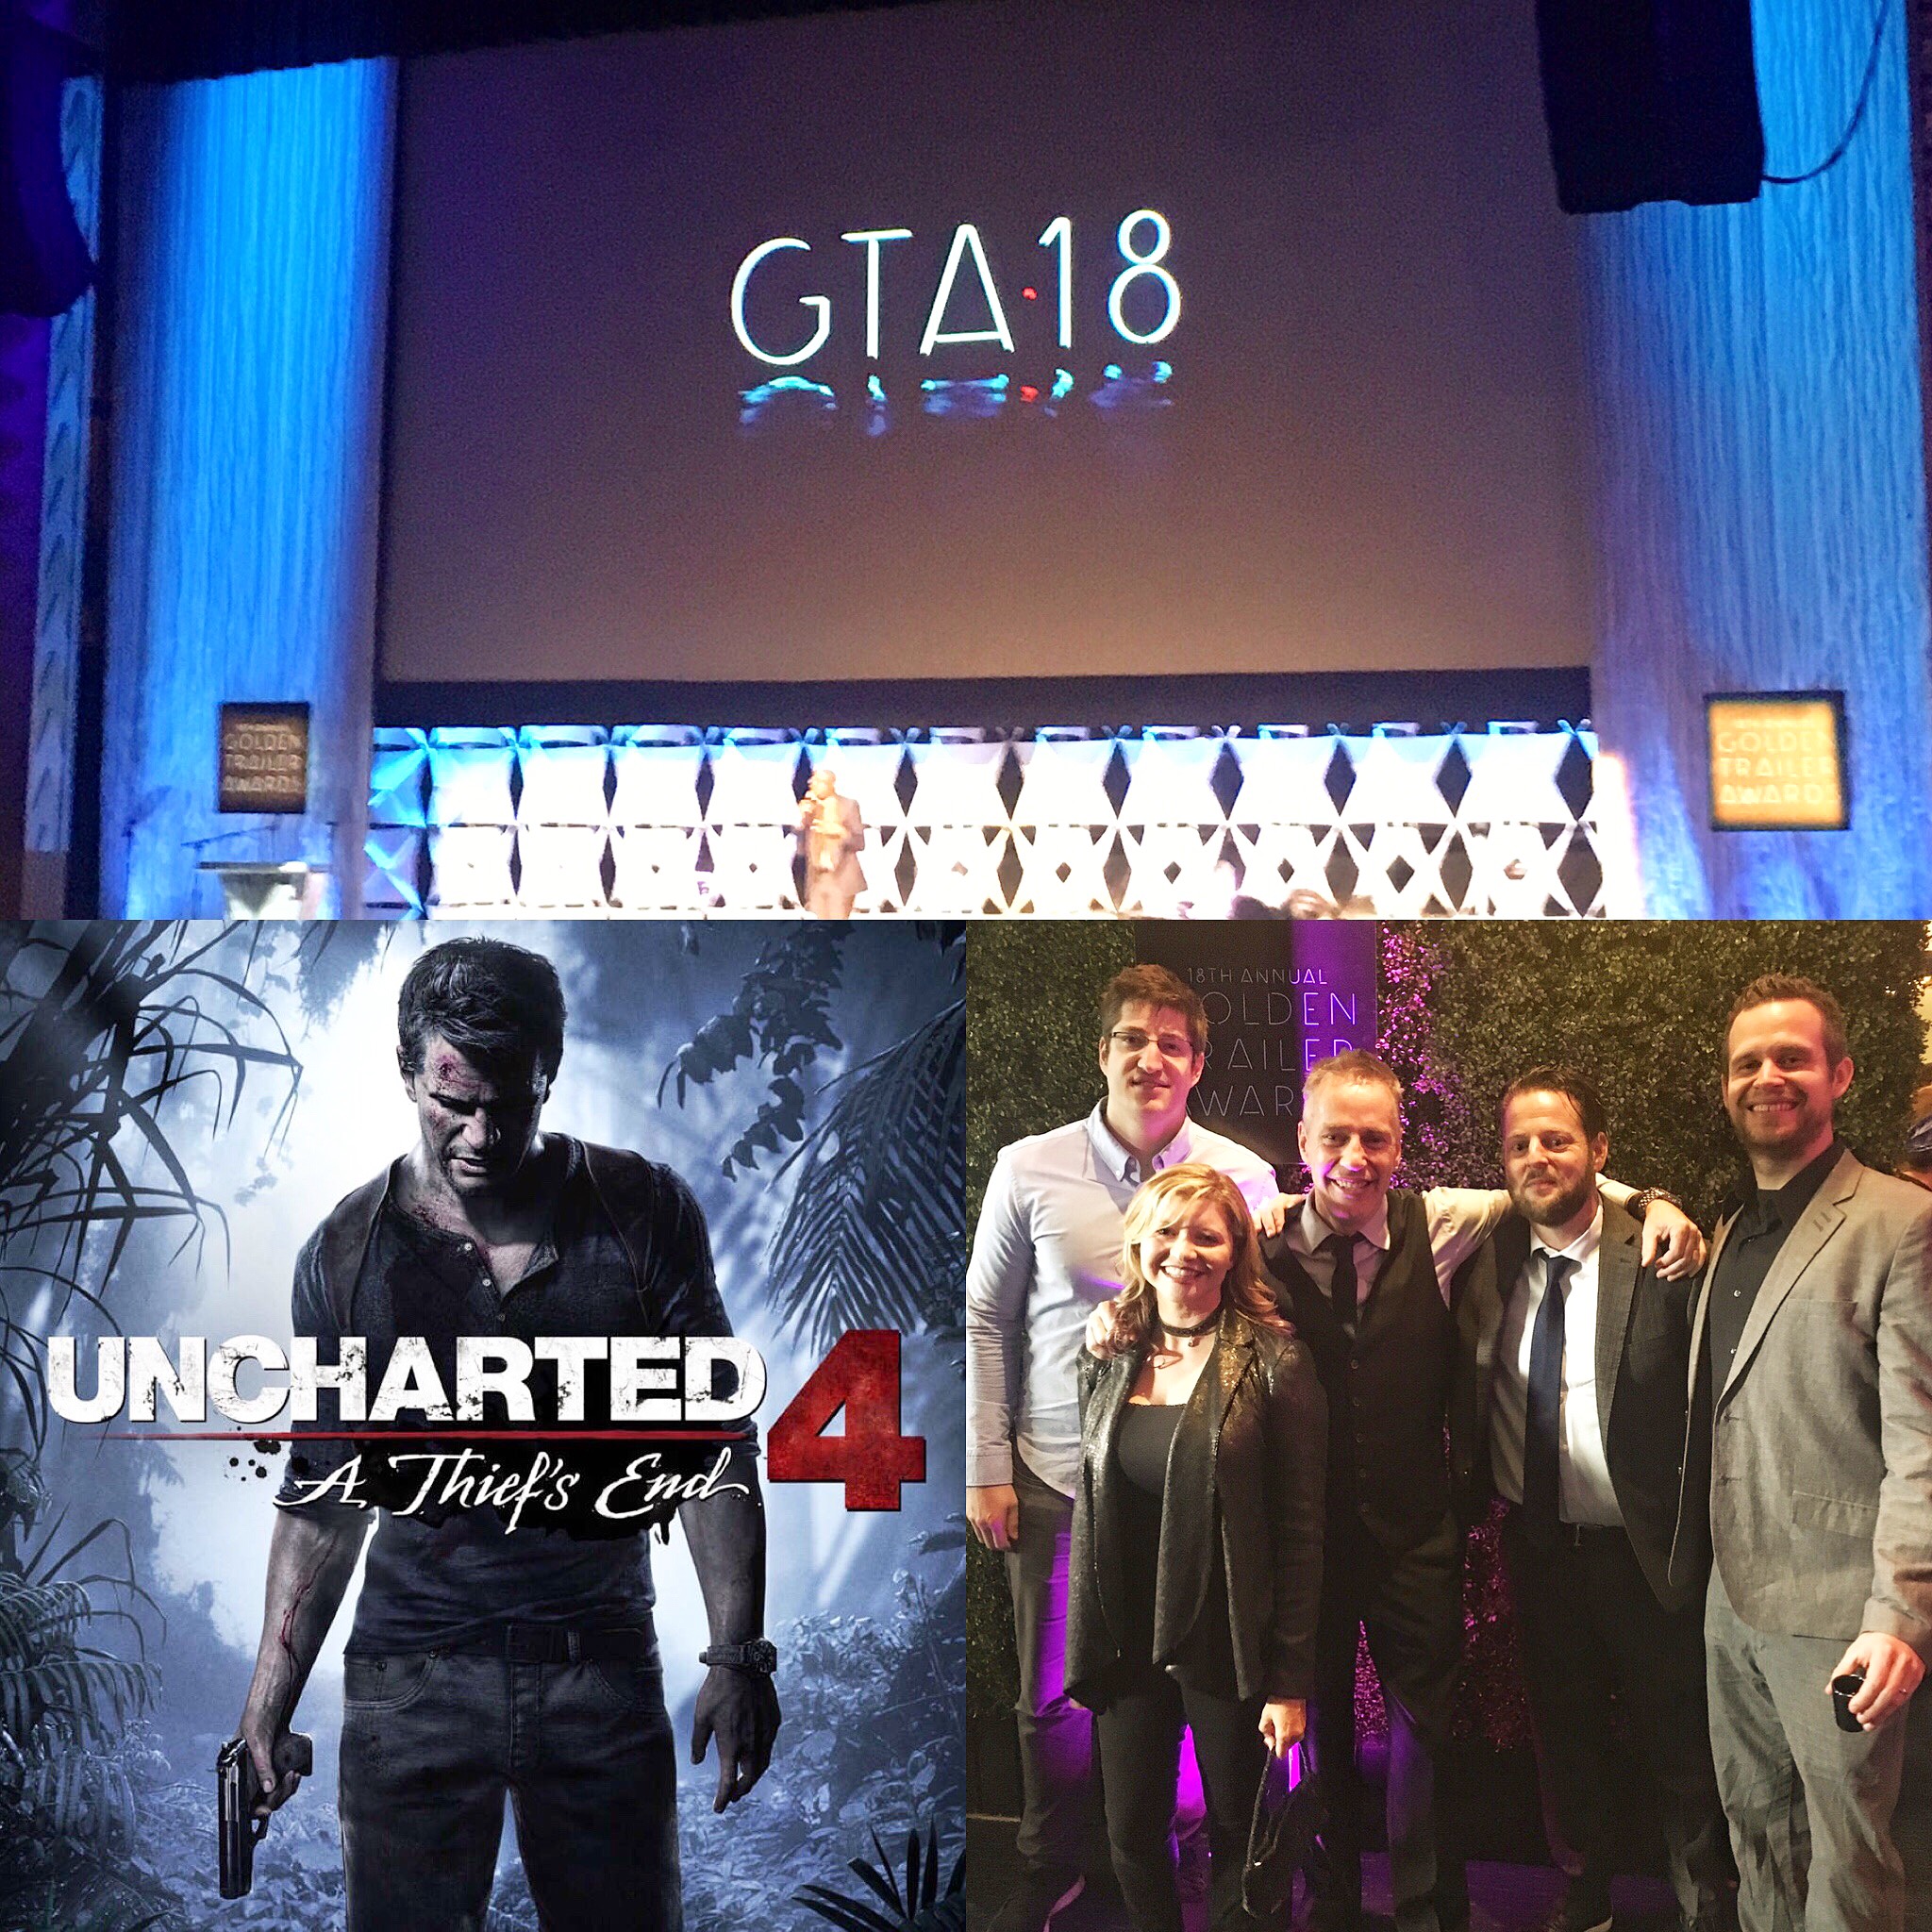 A win in "Best Video Game TV Spot" for "Uncharted 4: A Thief's End" by Playstation Creative with The Hit House's trailer music.